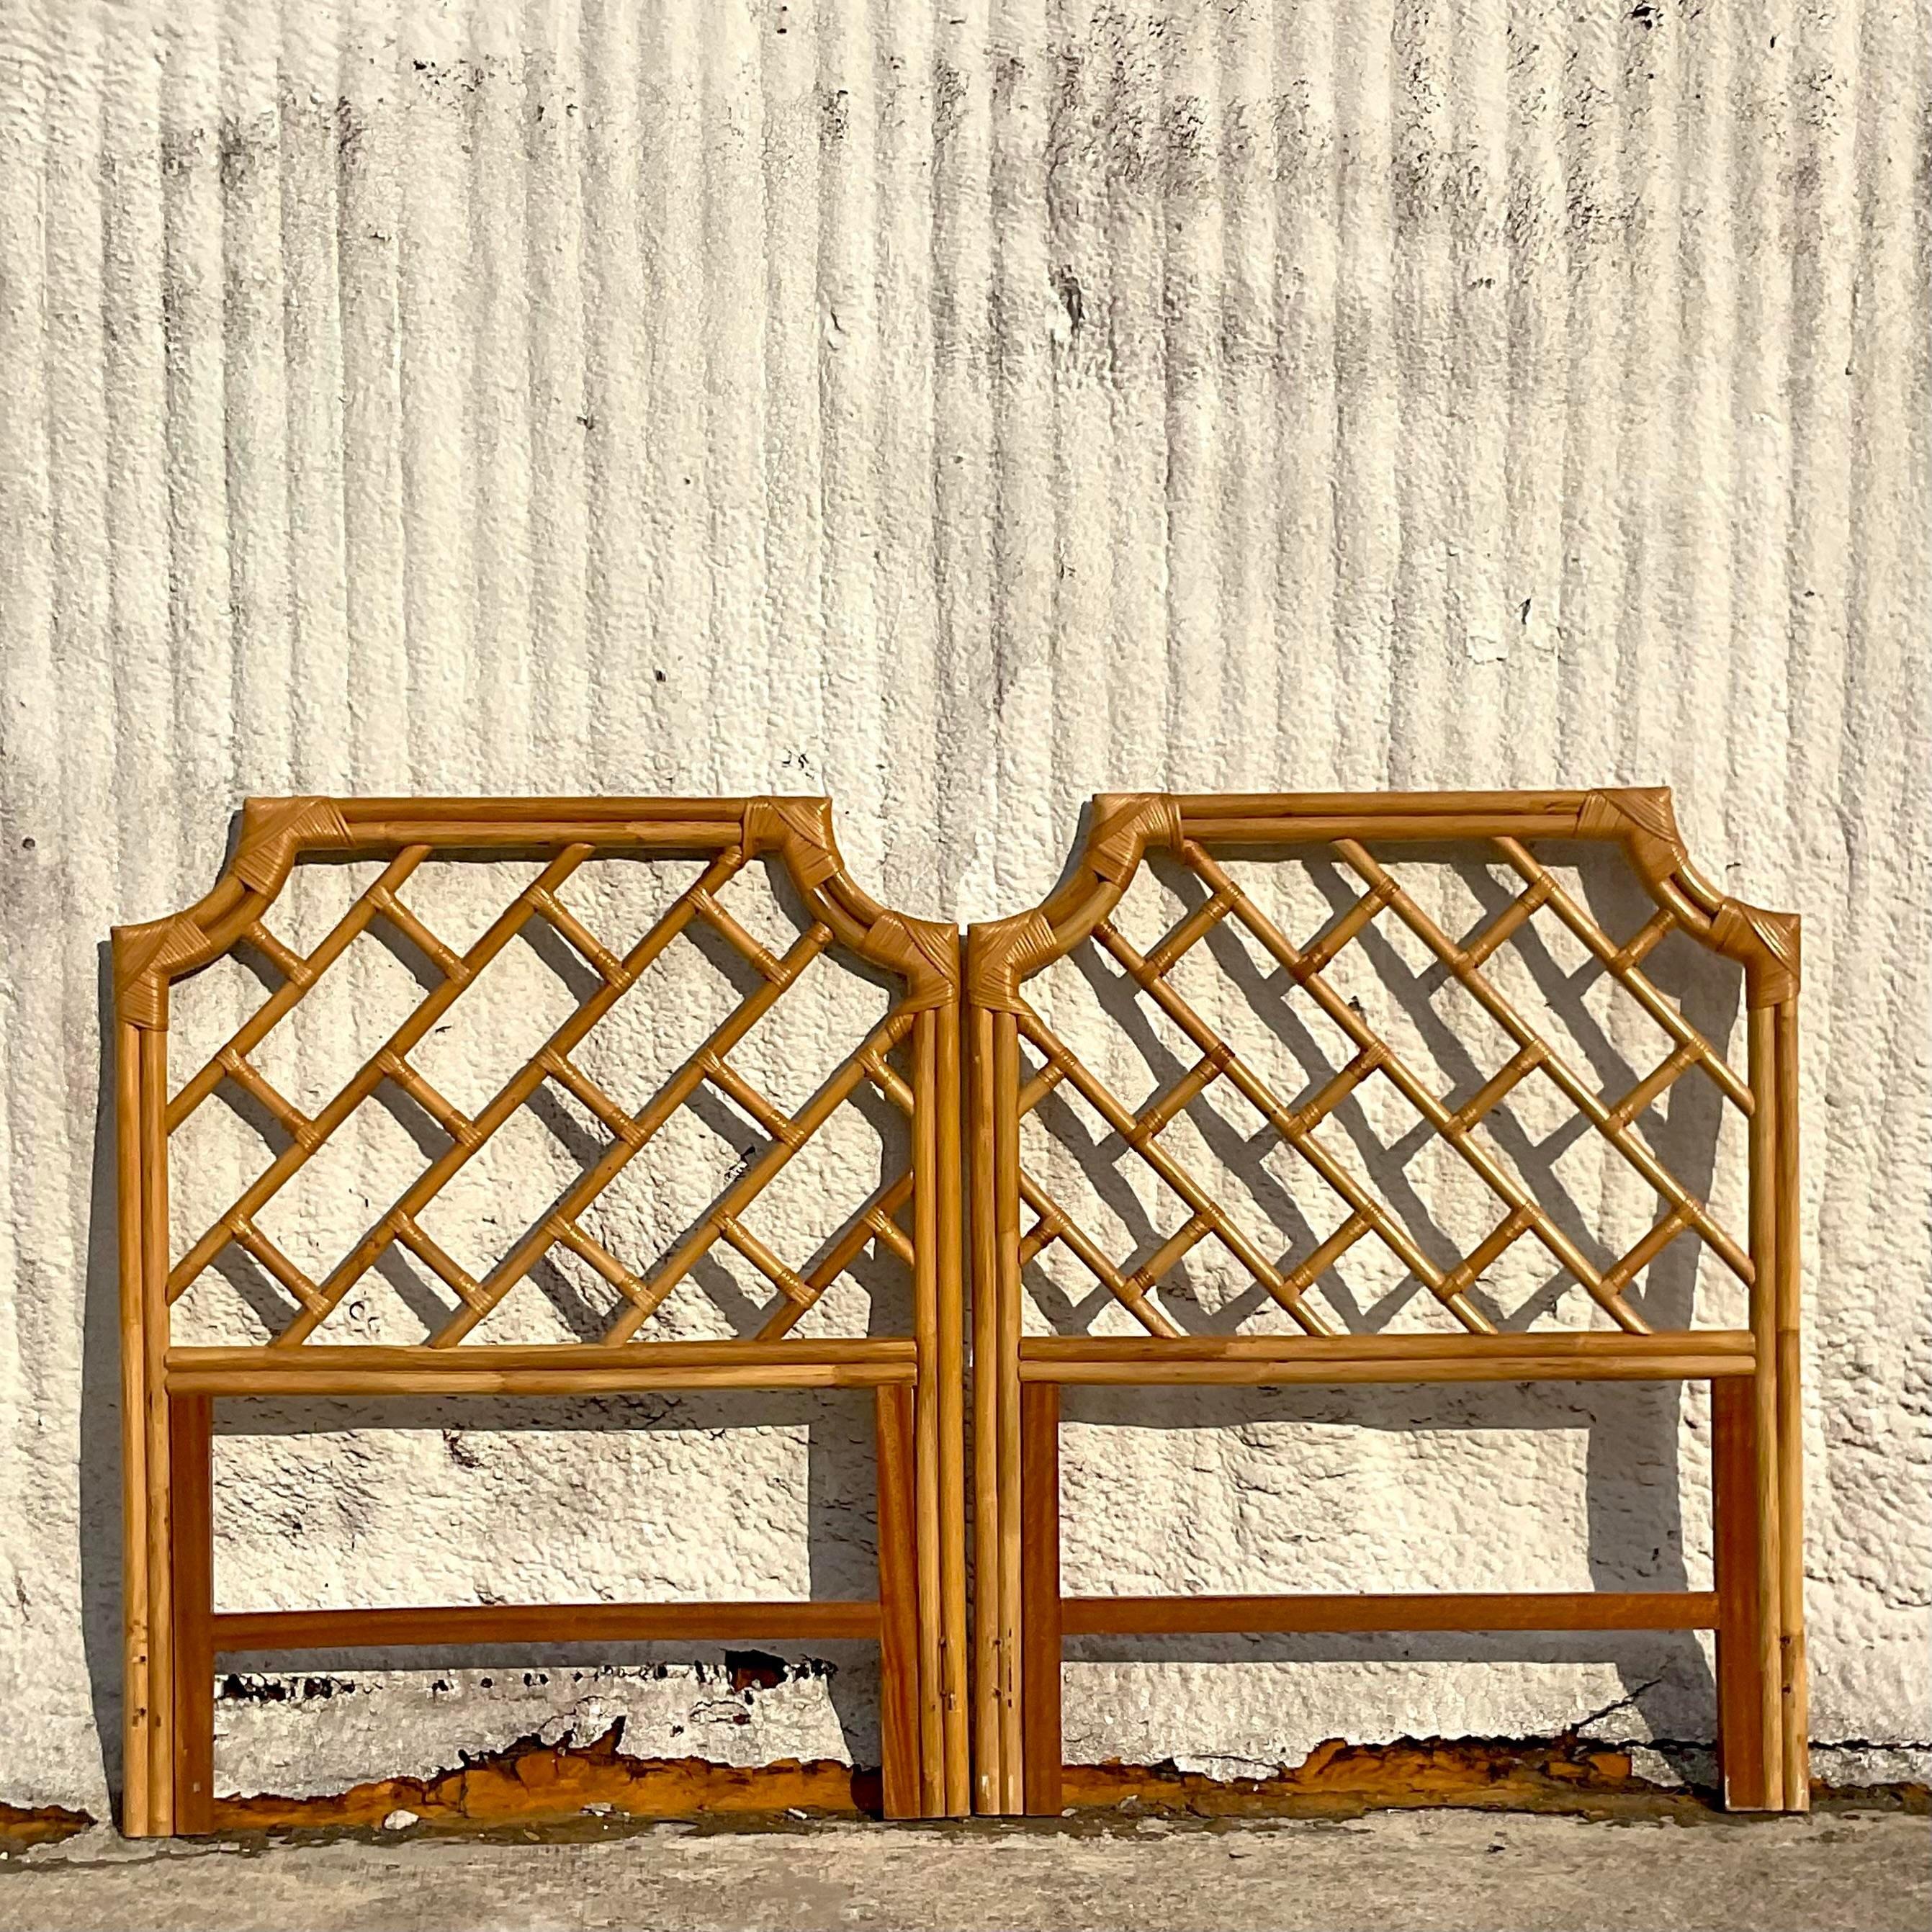 A stunning pair of vintage Coastal twin headboards. A chic bent rattan in a notched corner design. Acquired from a Palm Beach estate.